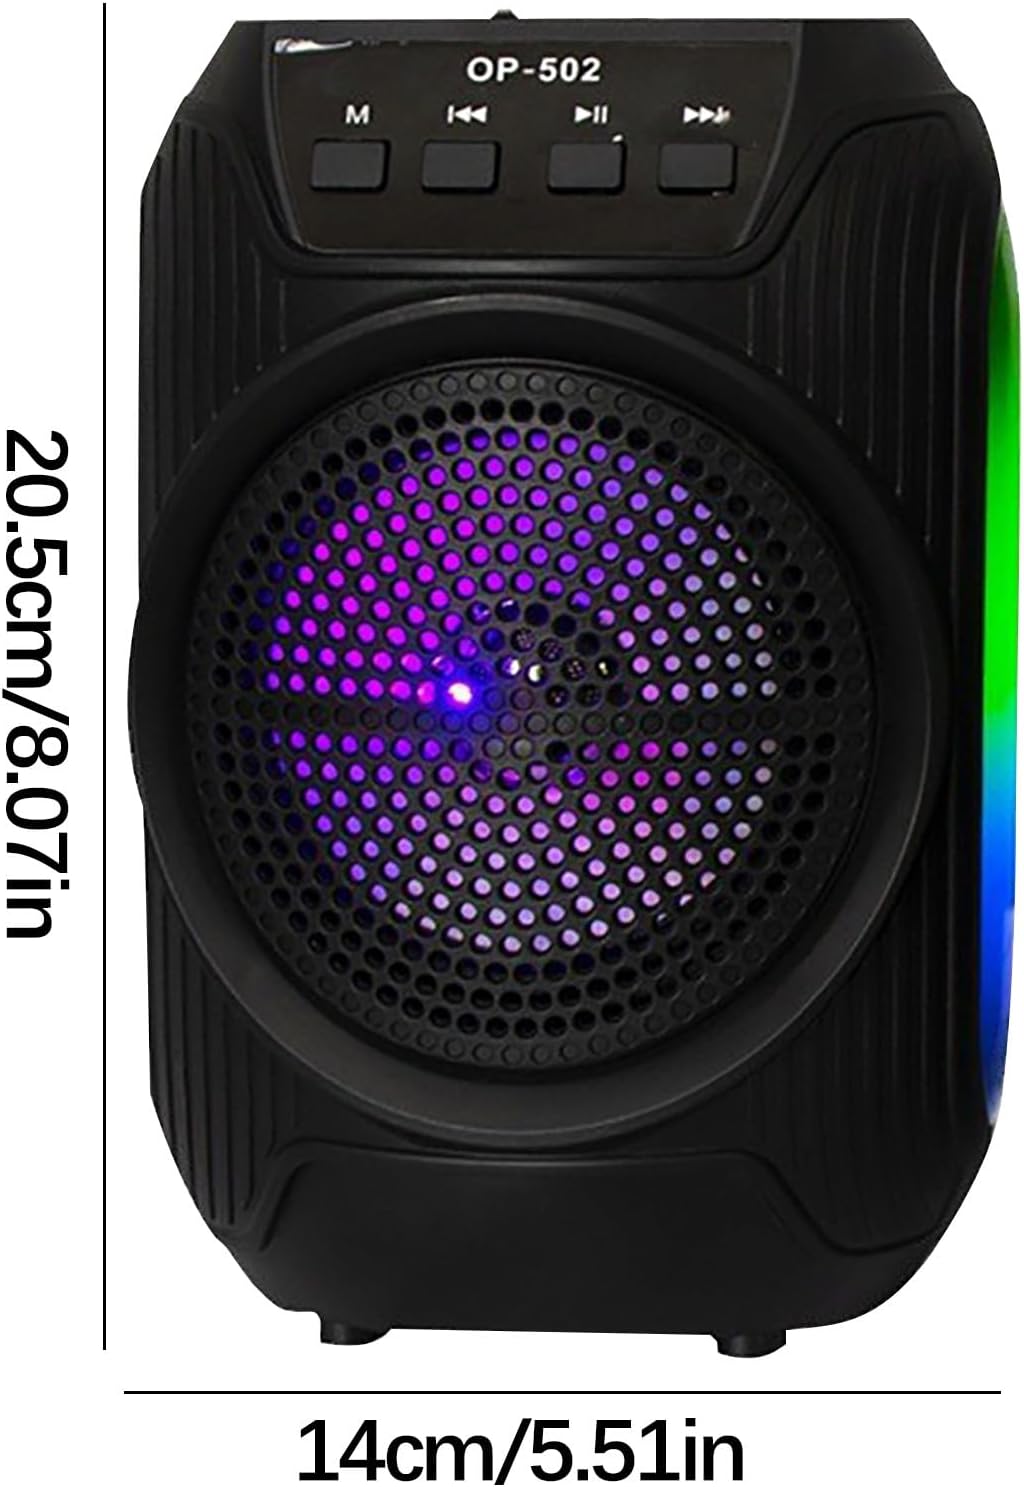 BoxPro-4Inch Portable Bluetooth speakers OP-502